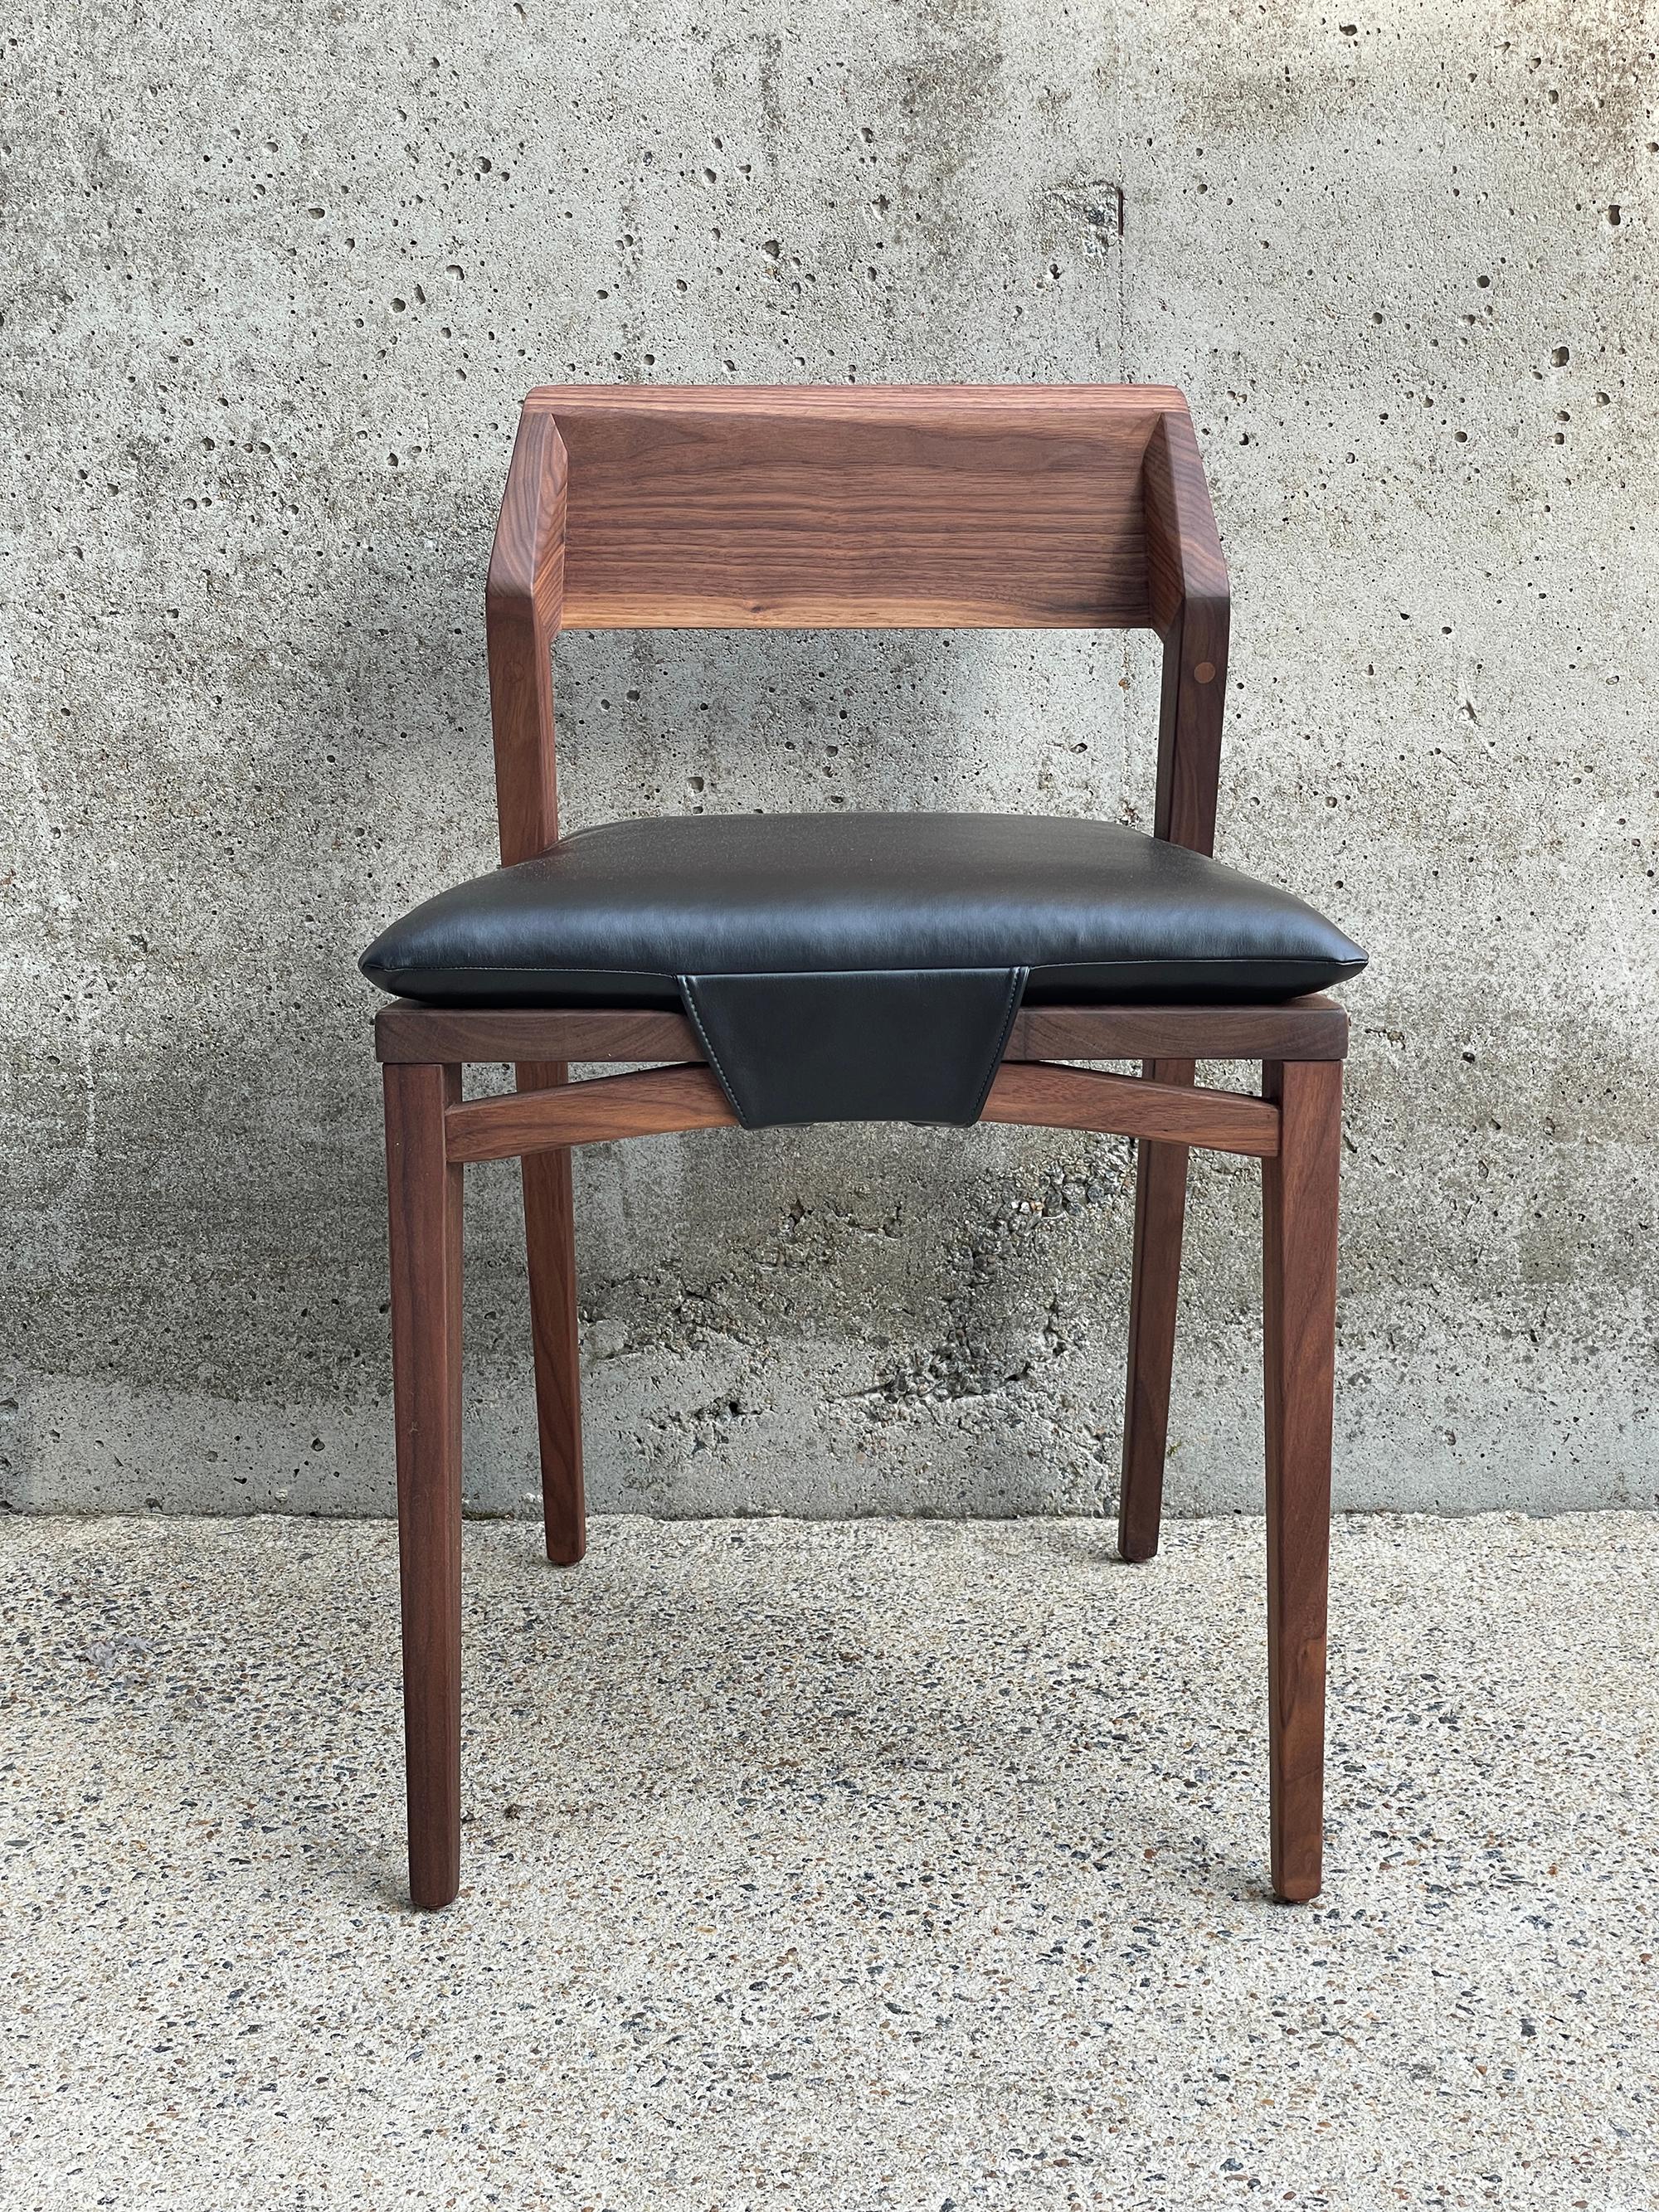 This modern dining chair with crisp, minimal lines is designed to work with modern/contemporary/transitional dining areas, as well as rustic/reclaimed farmhouse style tables. The backrest has gently faceted surfaces for a distinctly warm, geometric,